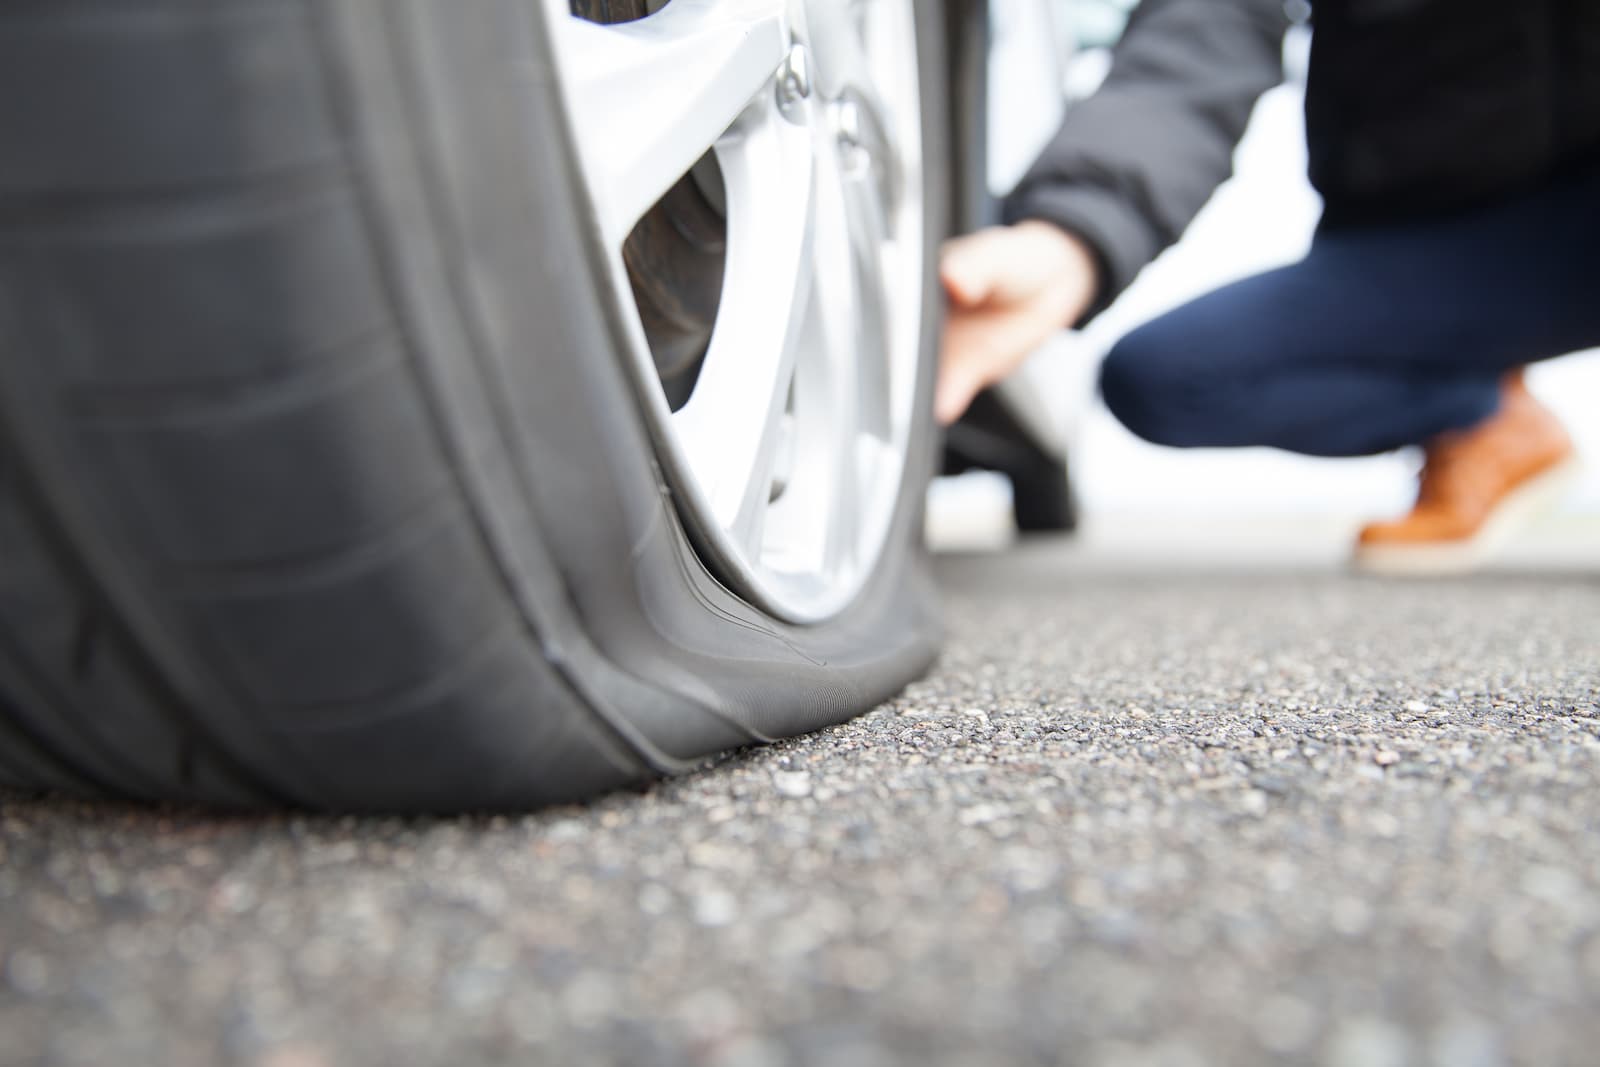 When to Repair a Tire with a Plug and When to Seek Professional Help